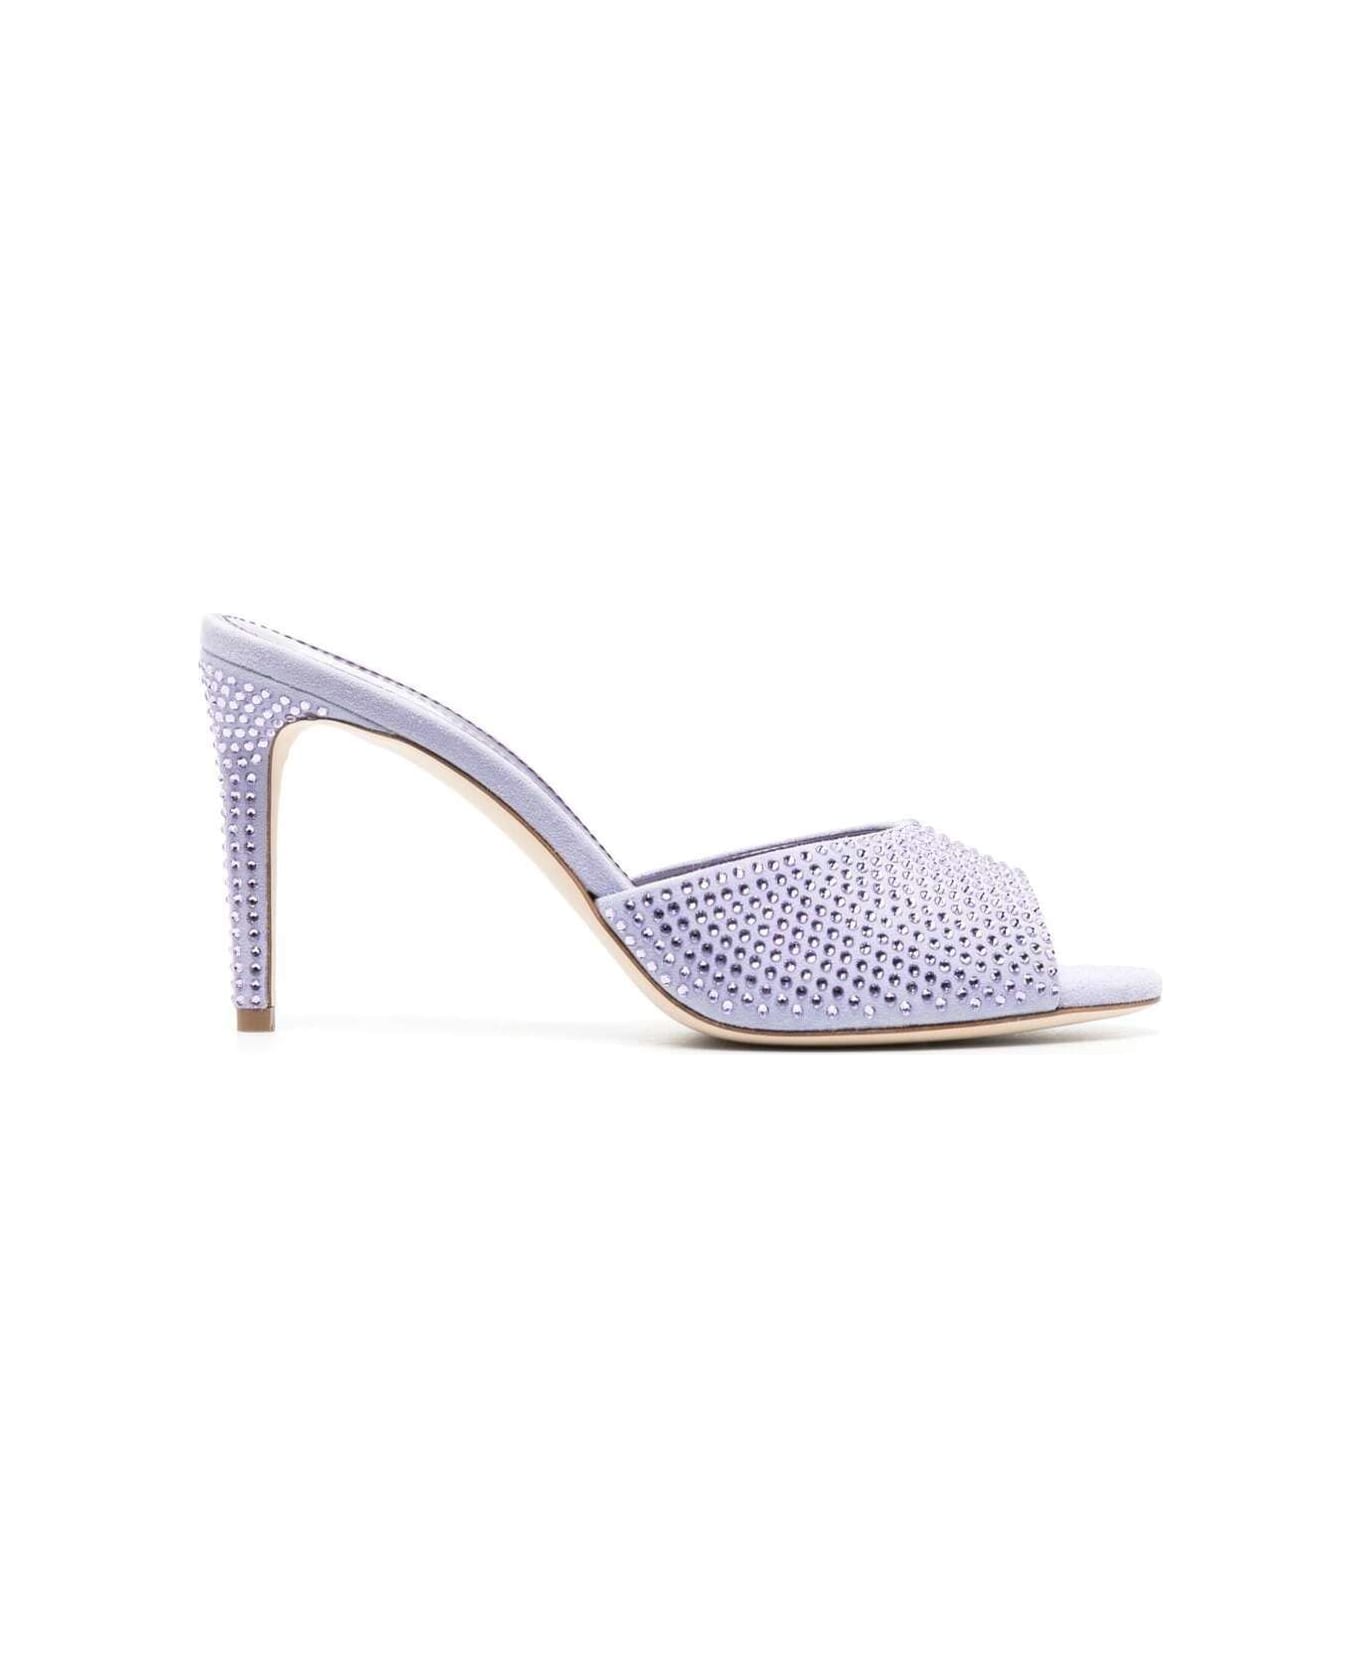 Paris Texas 'holly' Lilac Mules With Tonal Rhinestone Embellishment In Leather Woman - Violet